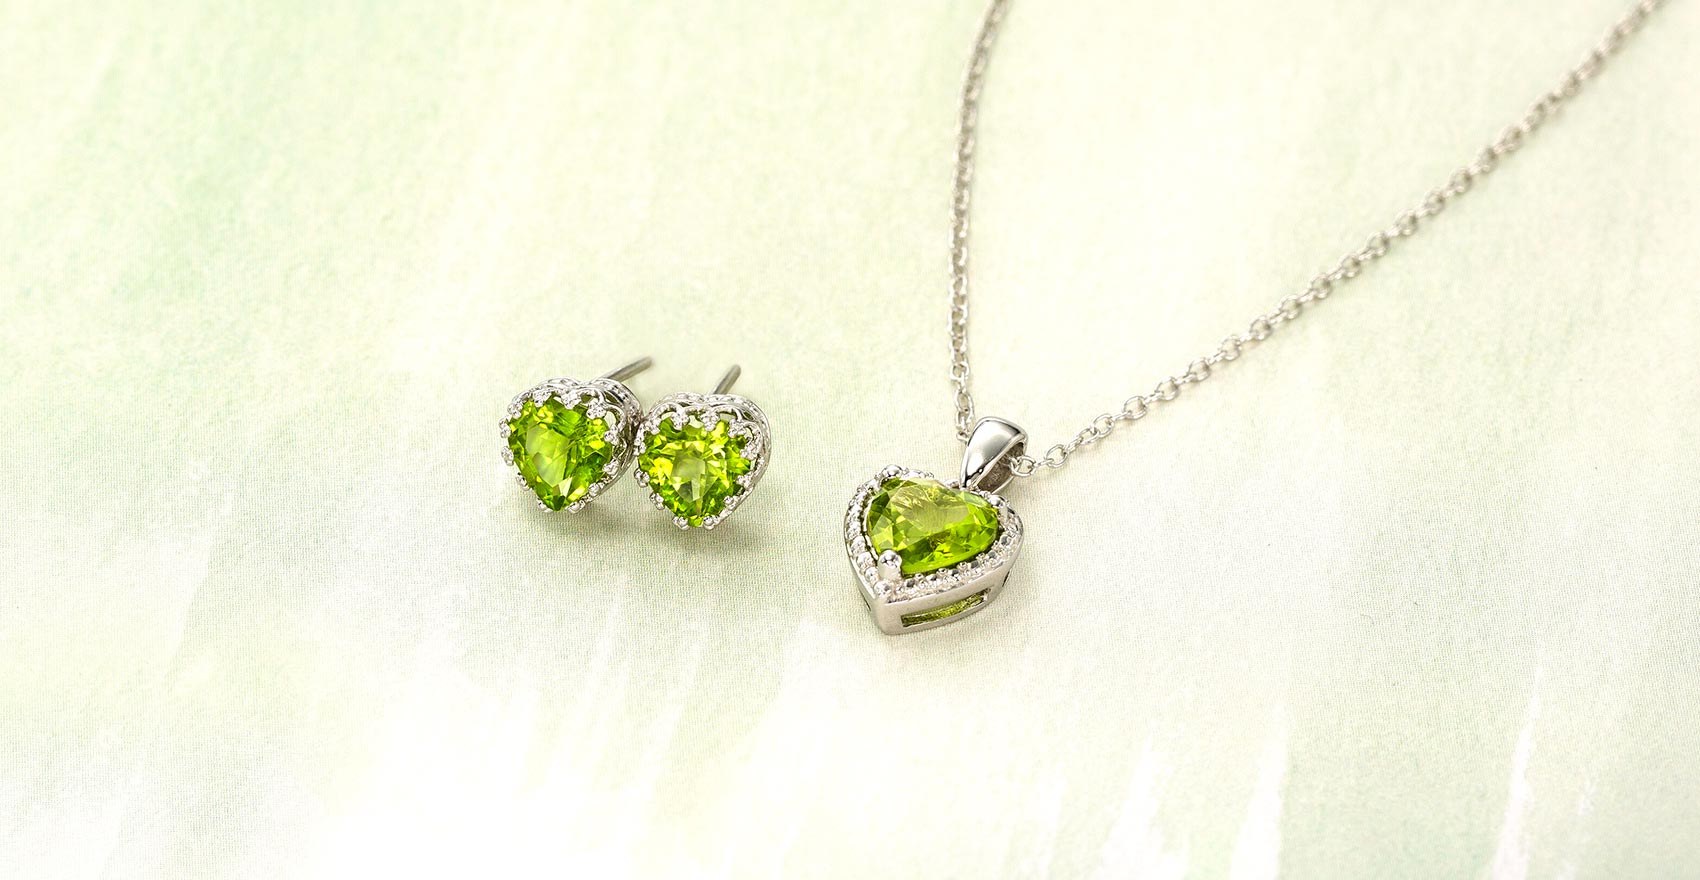 Peridot necklace and matching earrings on a marble background